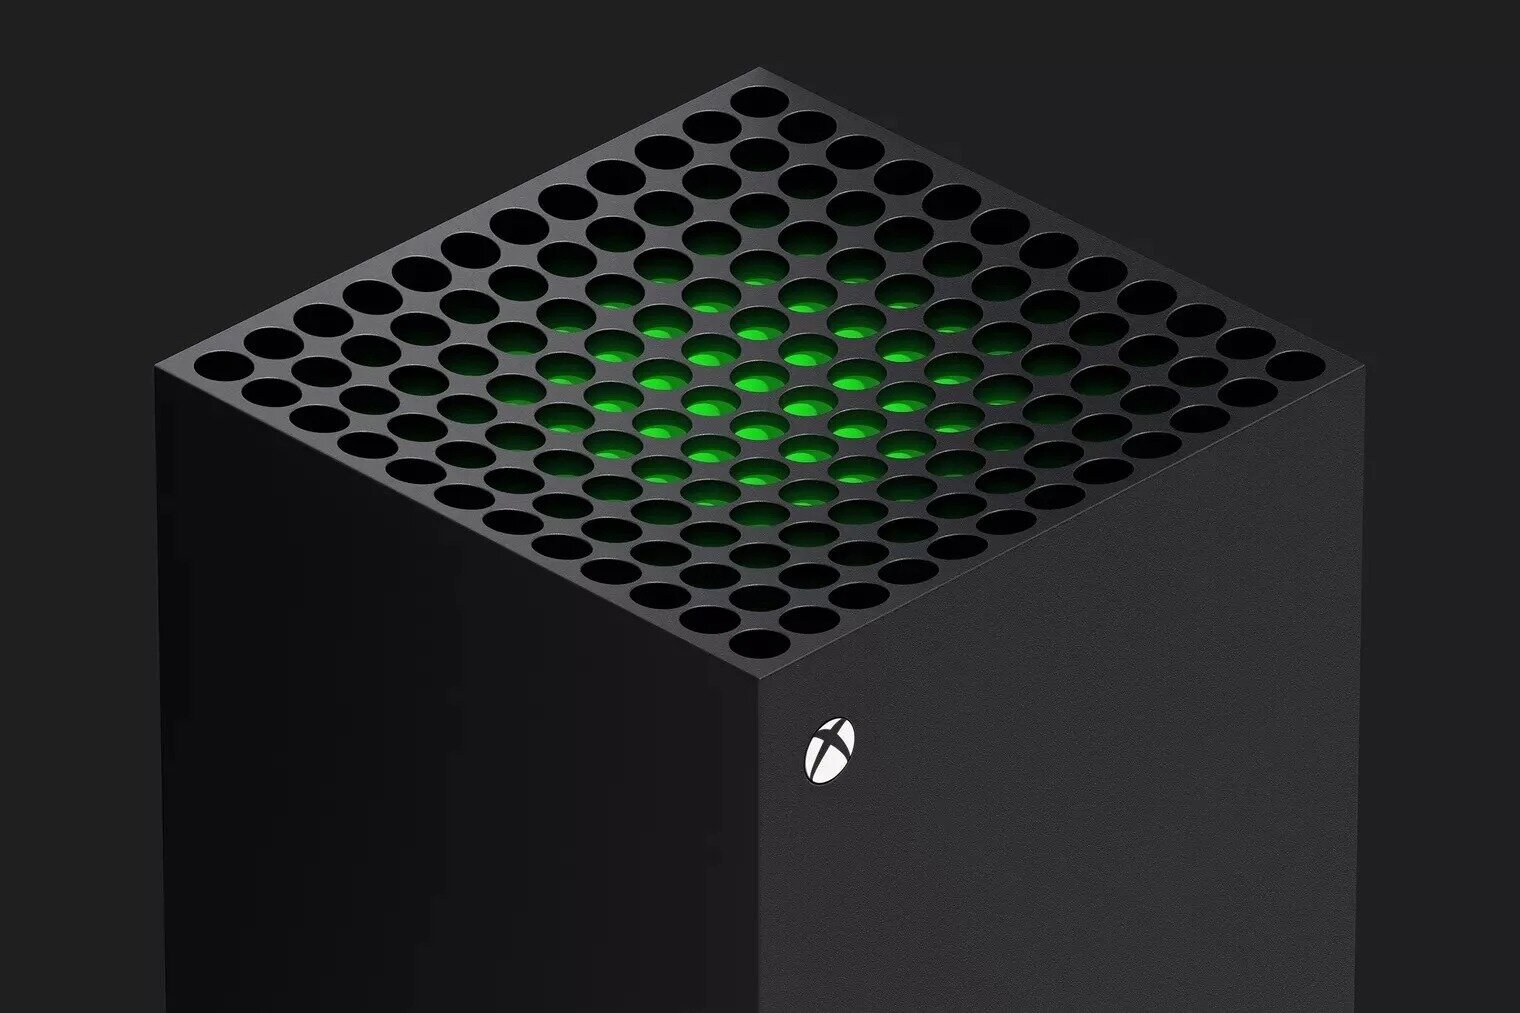 Microsoft’s head of Xbox believes losing the Xbox One generation was ‘the worst generation that could be lost’ – the Xbox